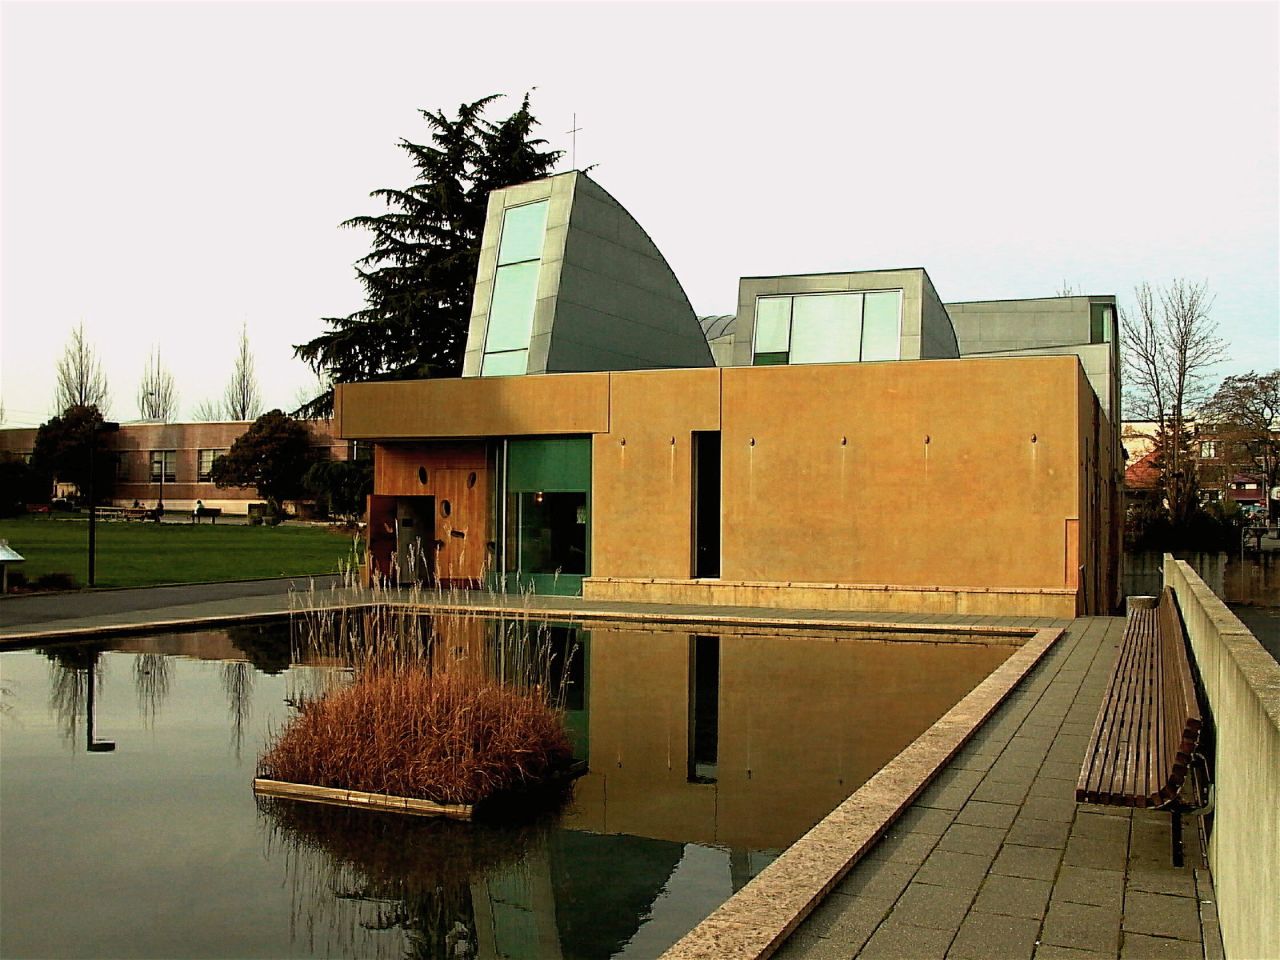 Kundig worked with architect Steven Holl on the Chapel of St. Ignatius.